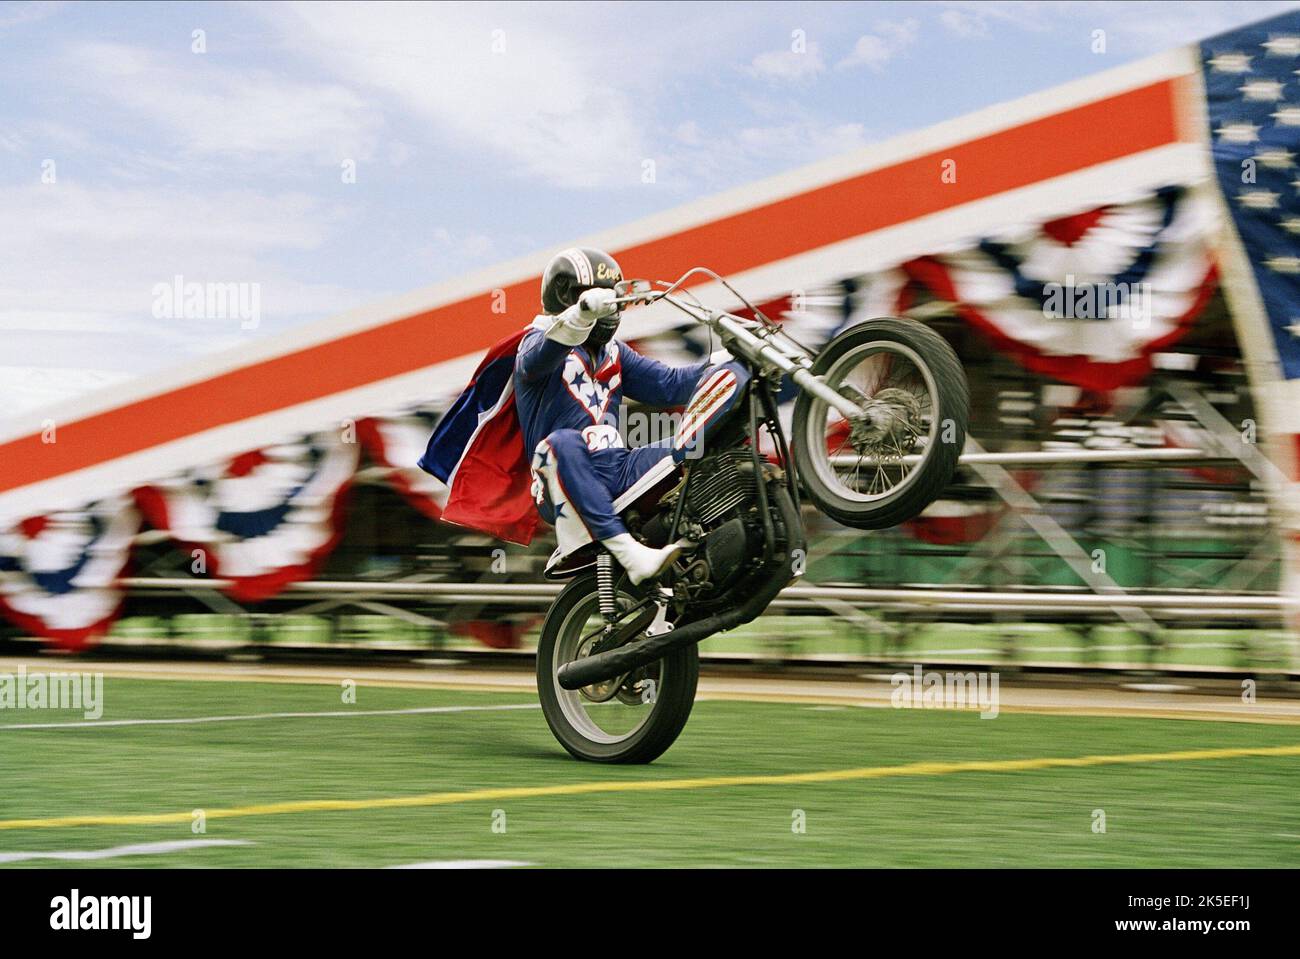 GEORGE EADS, EVEL KNIEVEL, 2004 Banque D'Images